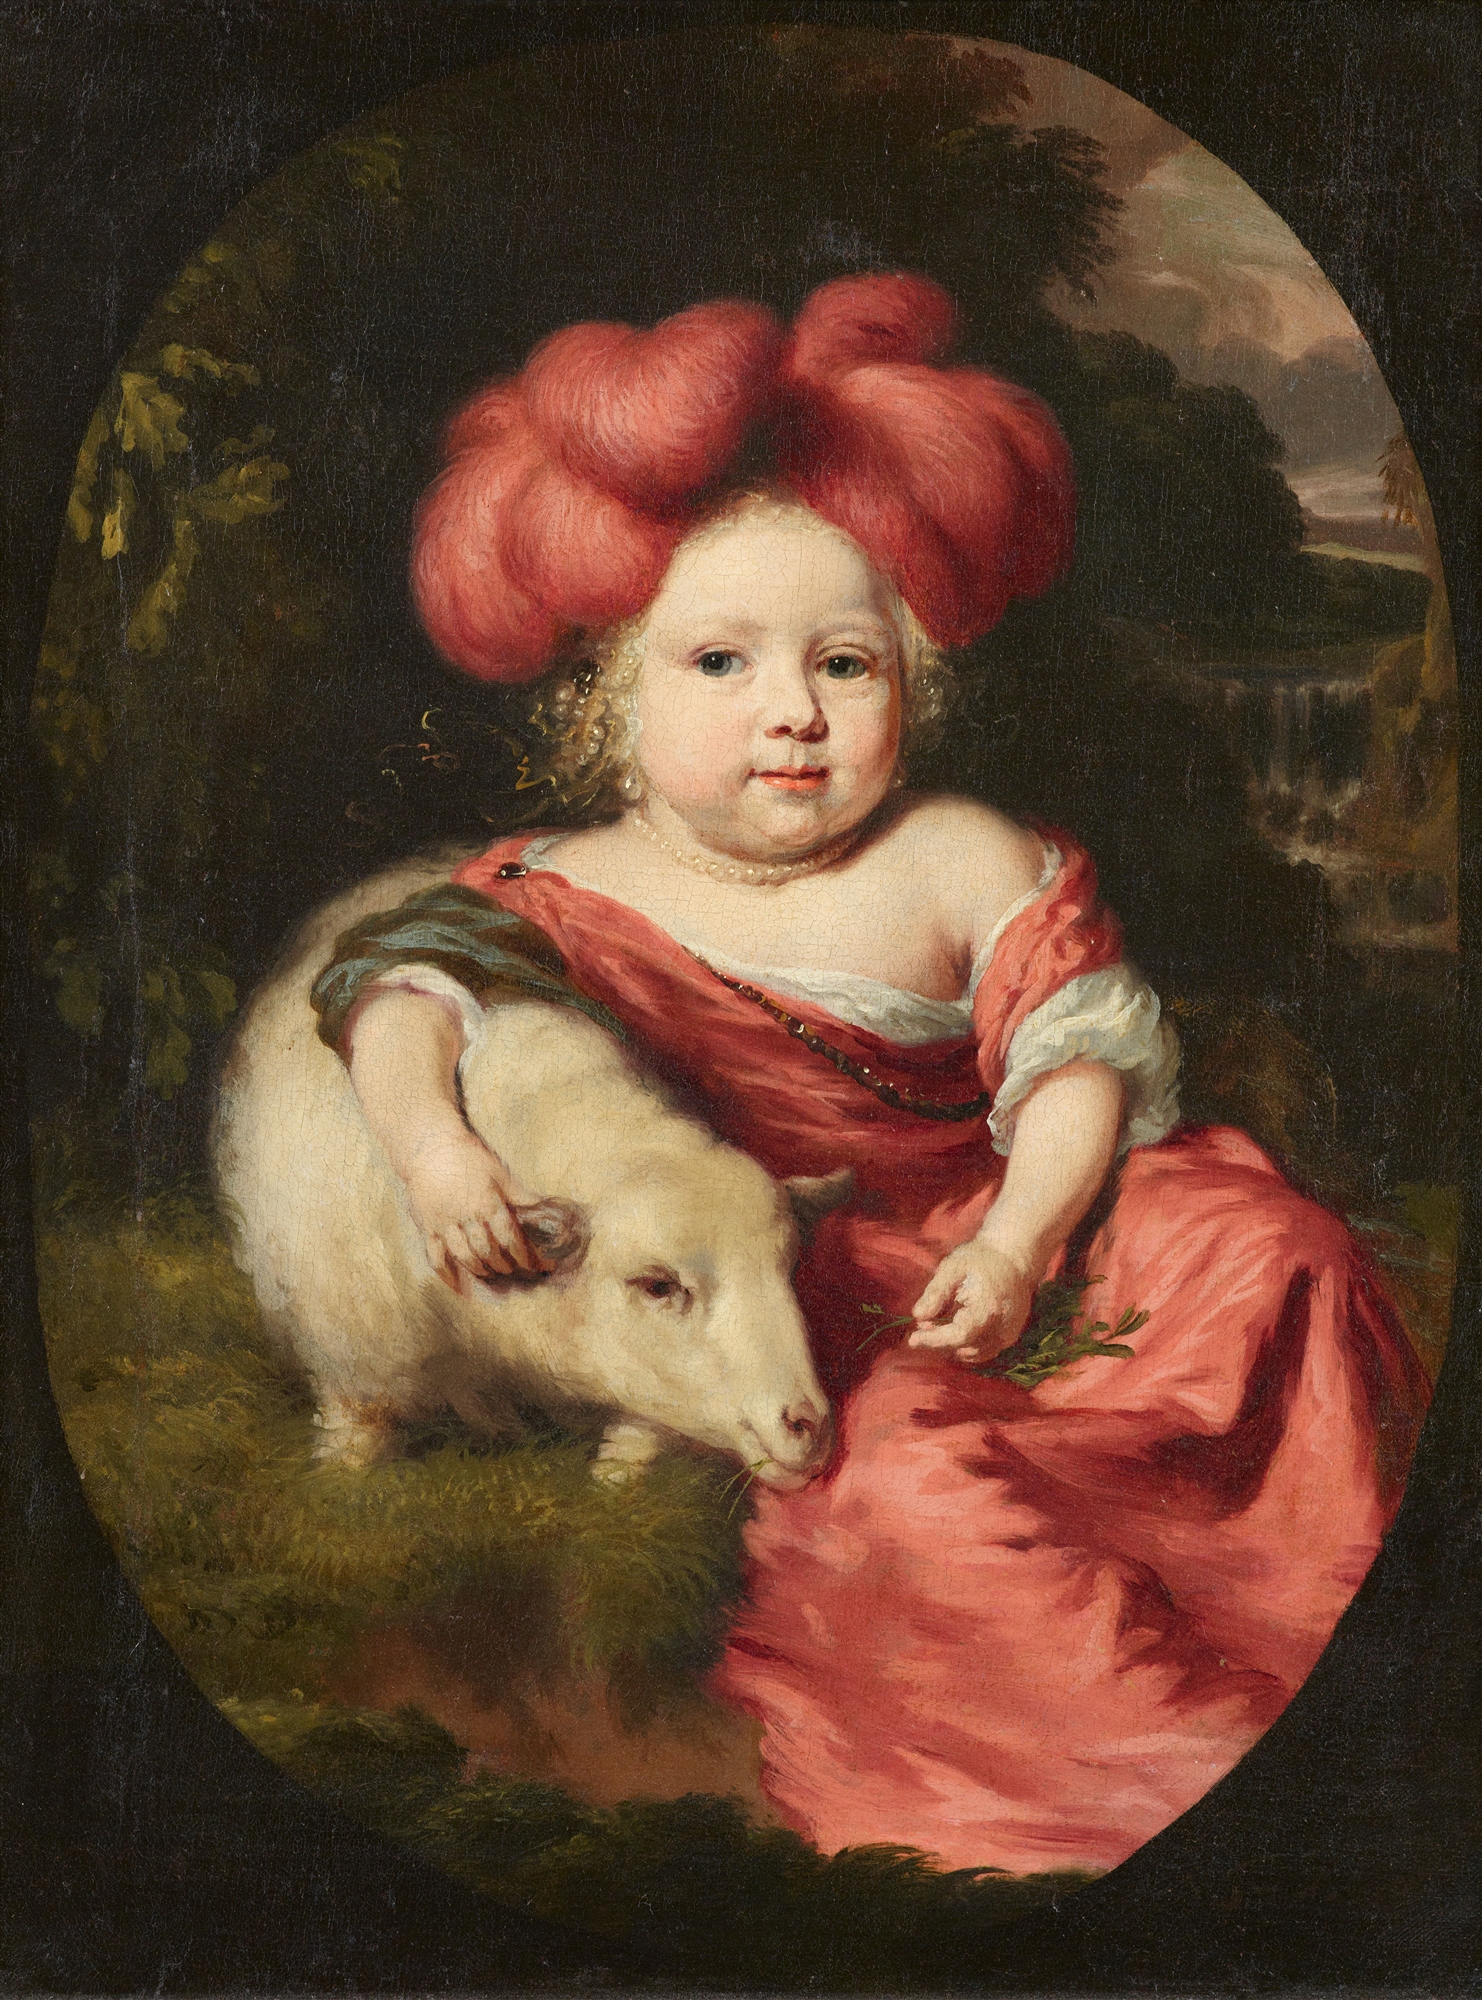 Nicolaes Maes, Portrait of a Boy with a Lamb